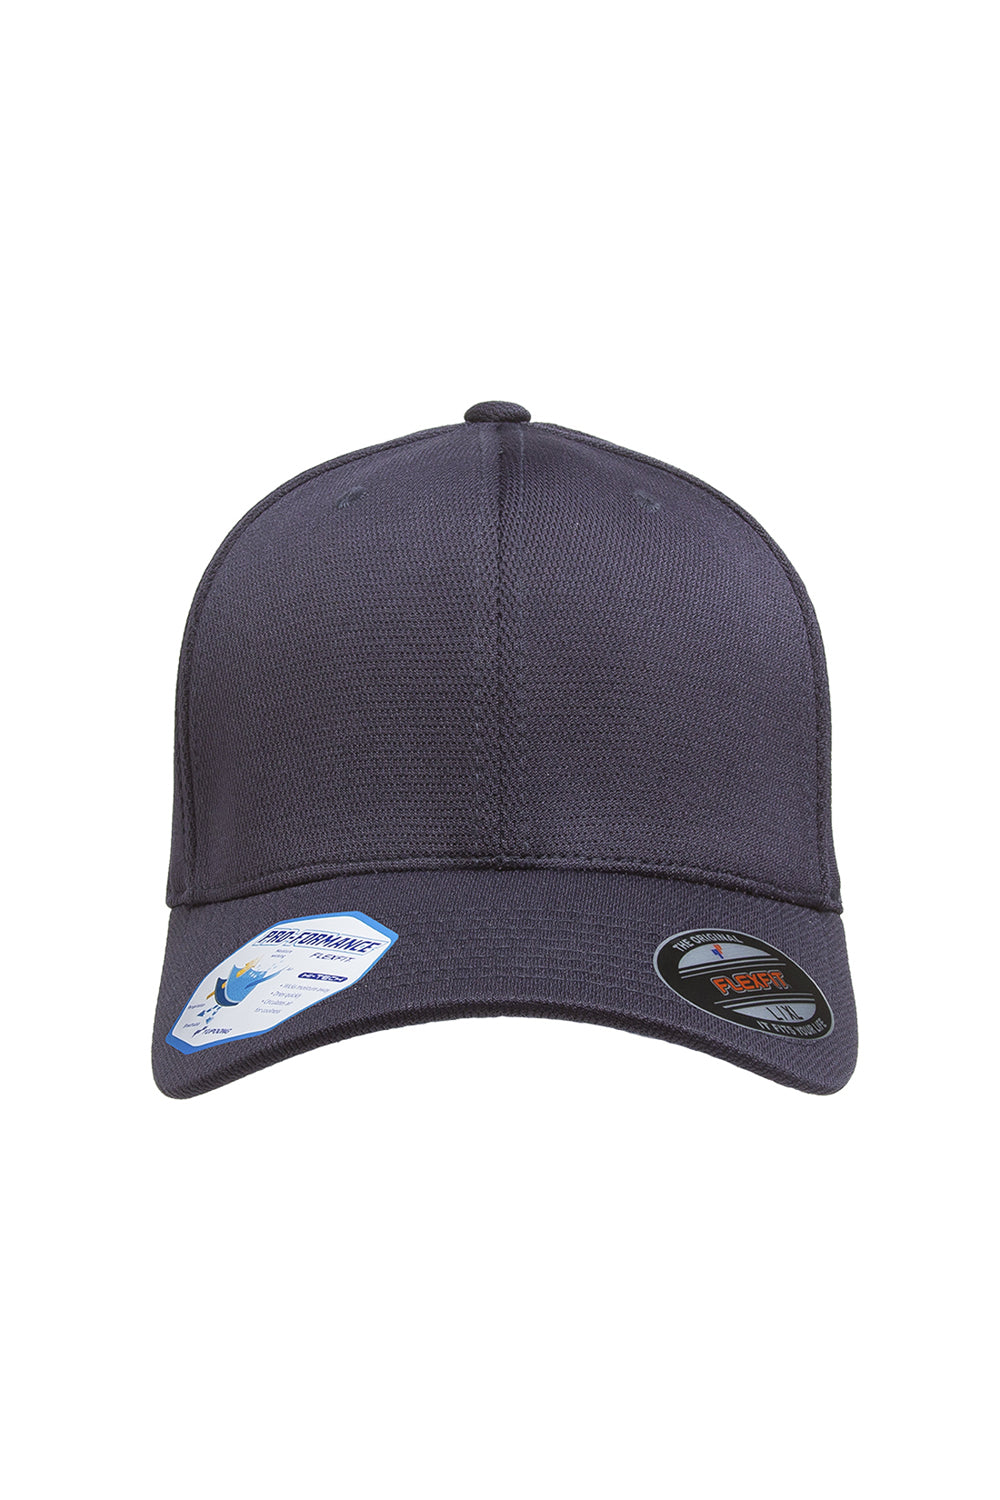 Flexfit 6597 Mens Cool & Dry Moisture Wicking Stretch Fit Hat Navy Blue Front